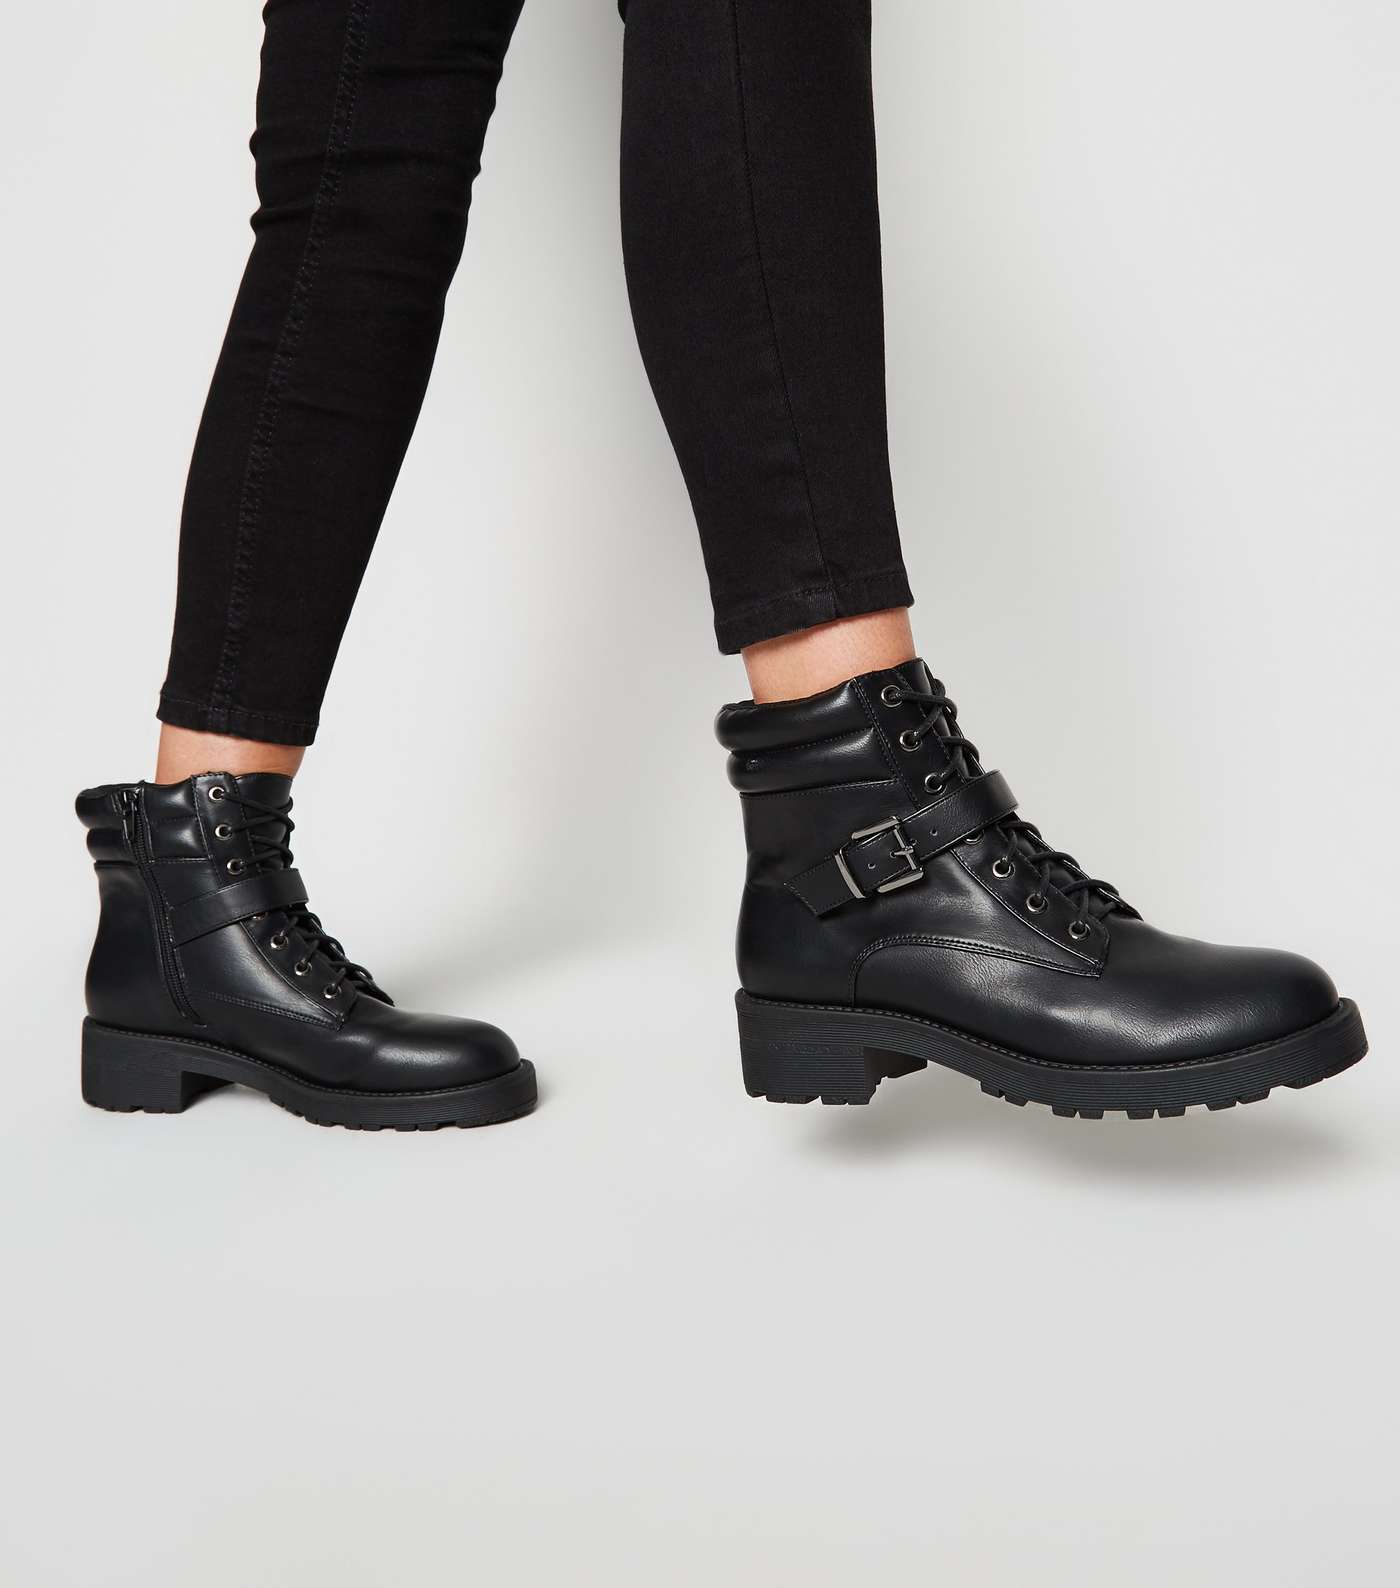 Black Leather-Look Lace Up Hiker Boots Image 2